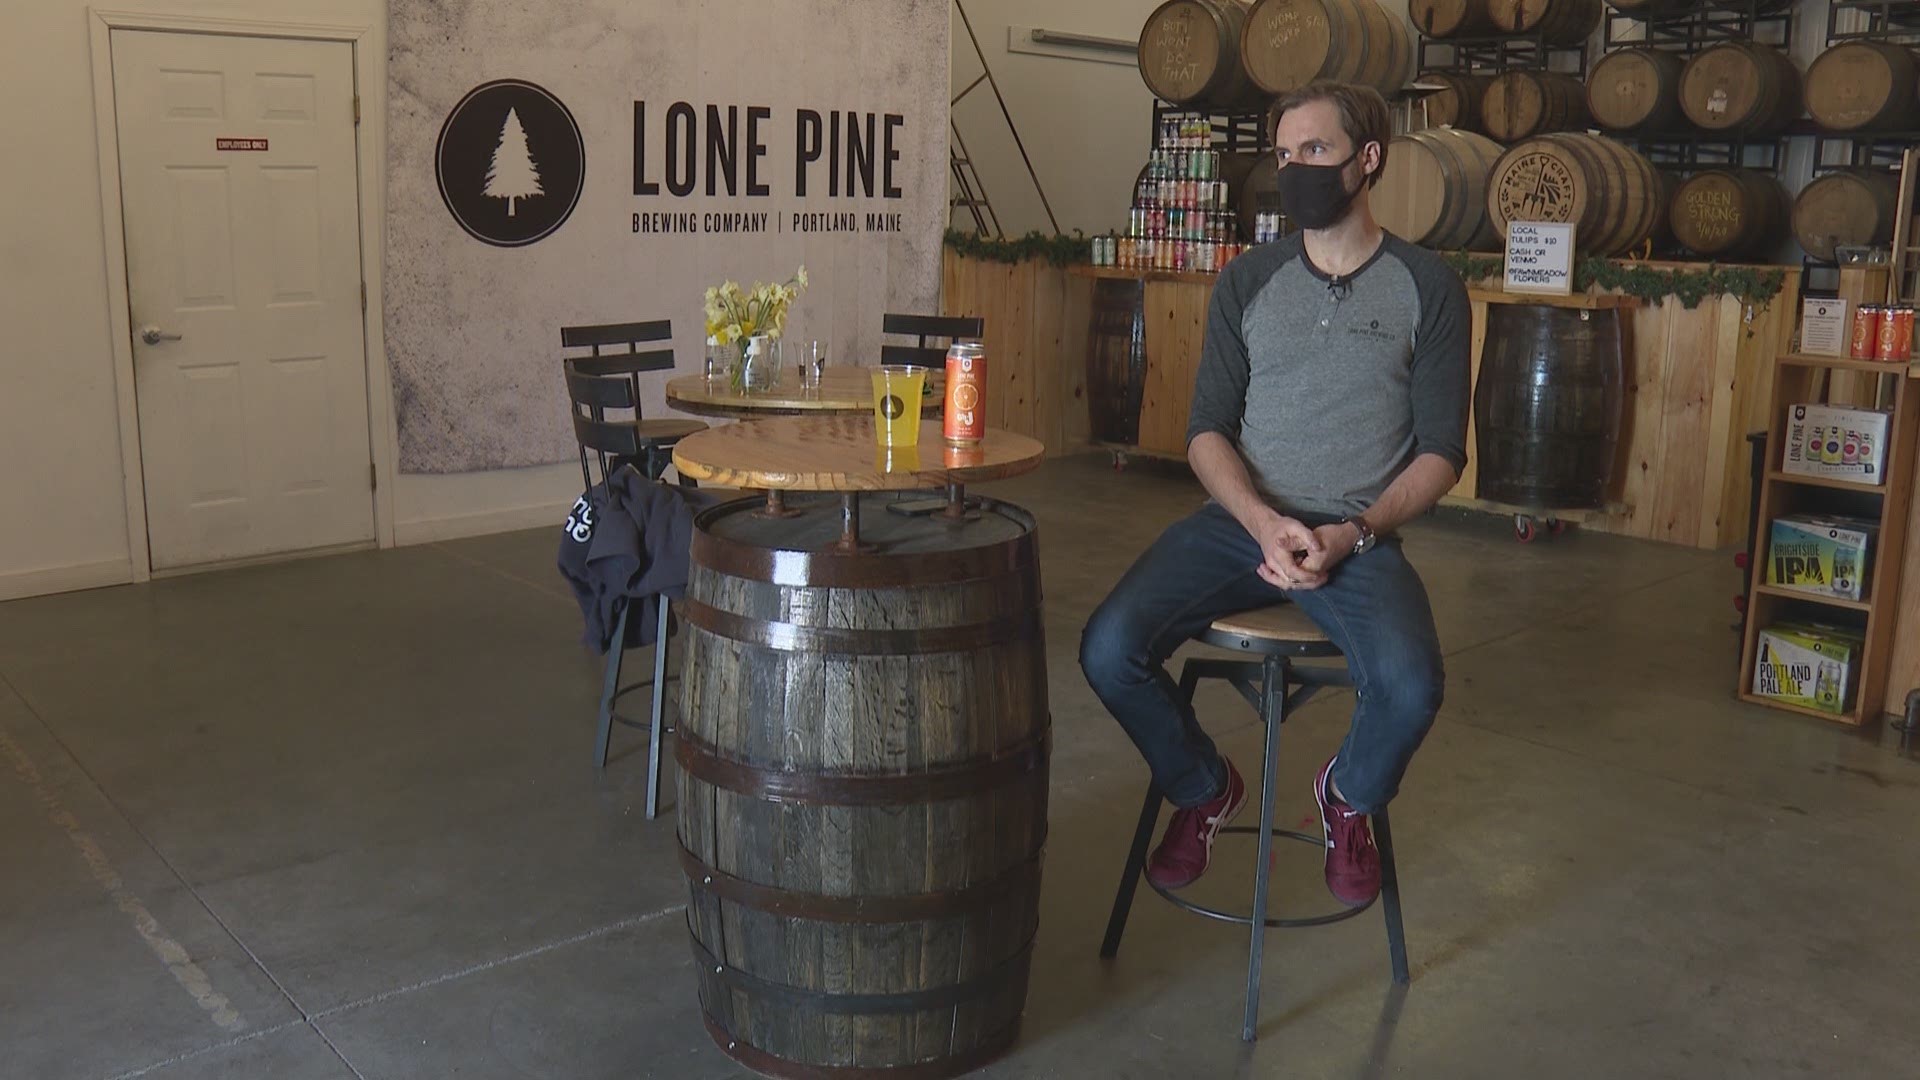 Lone Pine is one of 38 breweries part of the Maine Brewshed Alliance, committed to protecting and preserving Sebago Lake, which provides water for its beer.